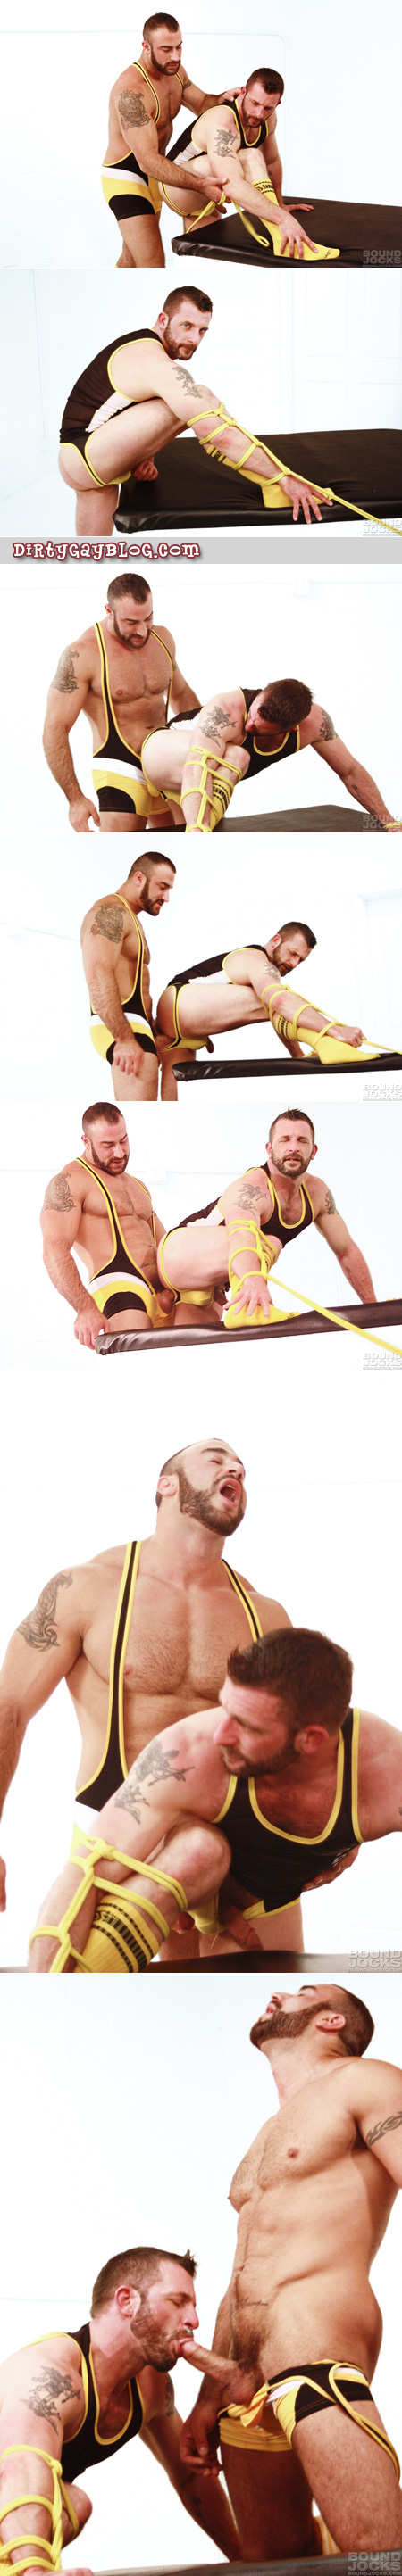 Two burly guys in wrestling singlets and jockstraps have gay bondage sex.